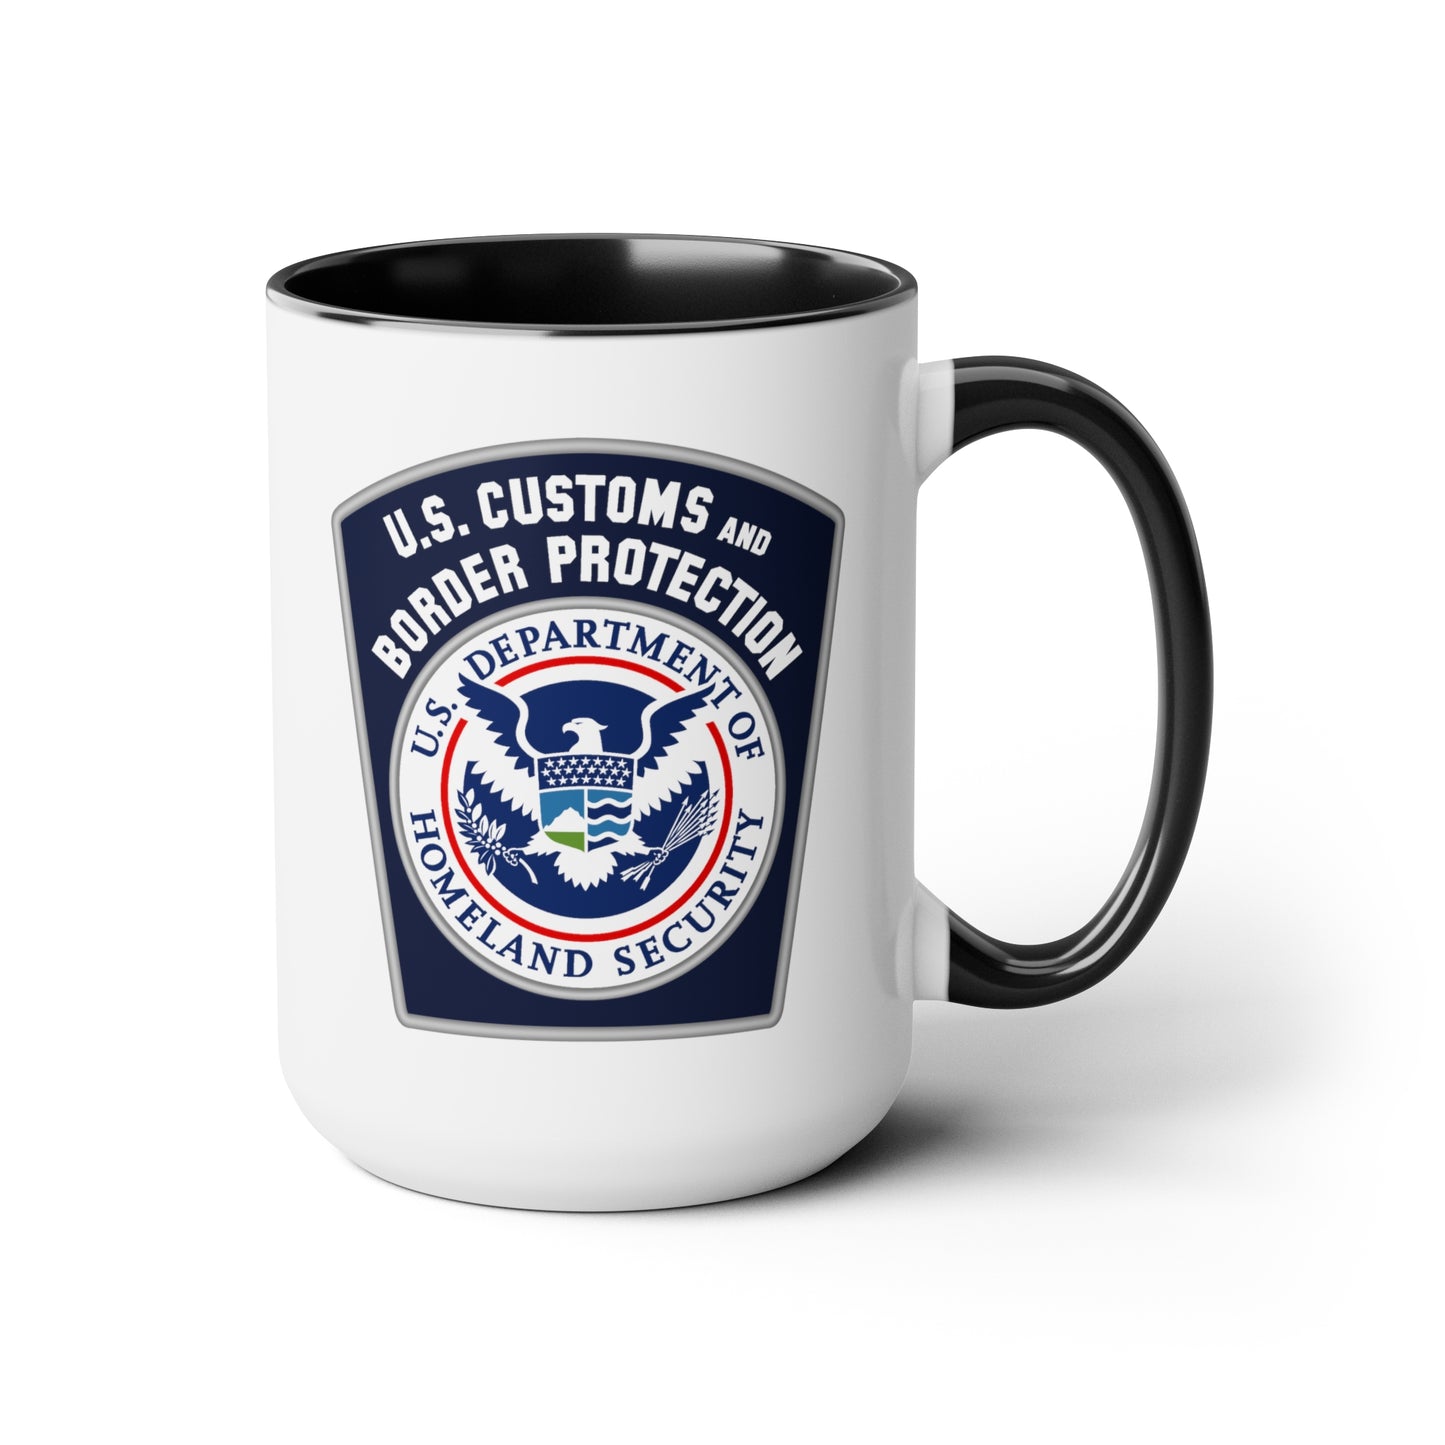 US Customs and Border Protection Coffee Mug - Double Sided Black Accent White Ceramic 15oz by TheGlassyLass